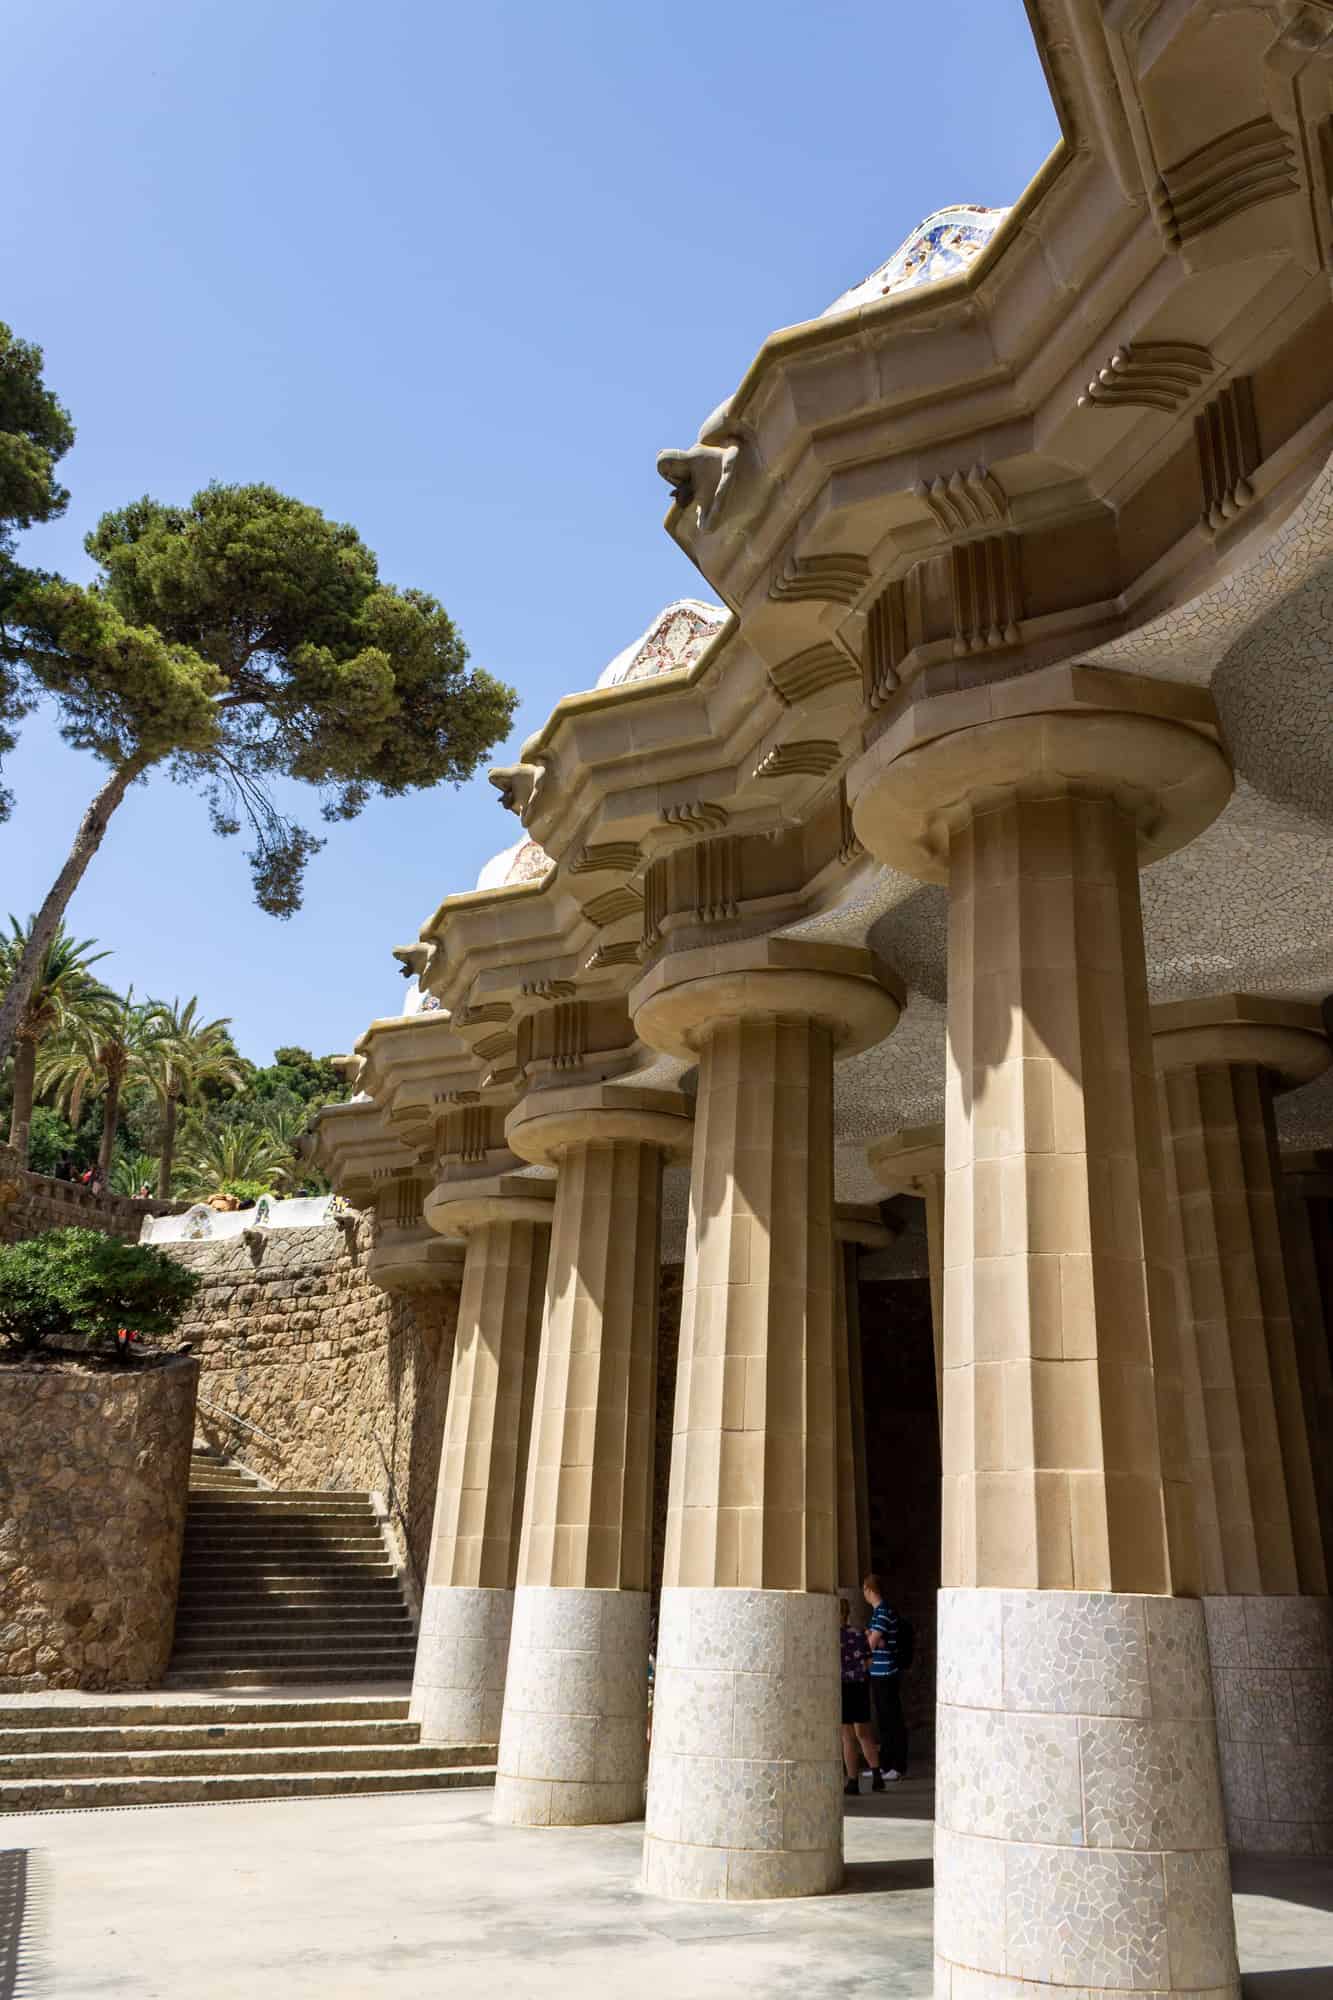 View of the architectural details of the Park Guell designed by Antoni Gaudi in Barcelona, Spain